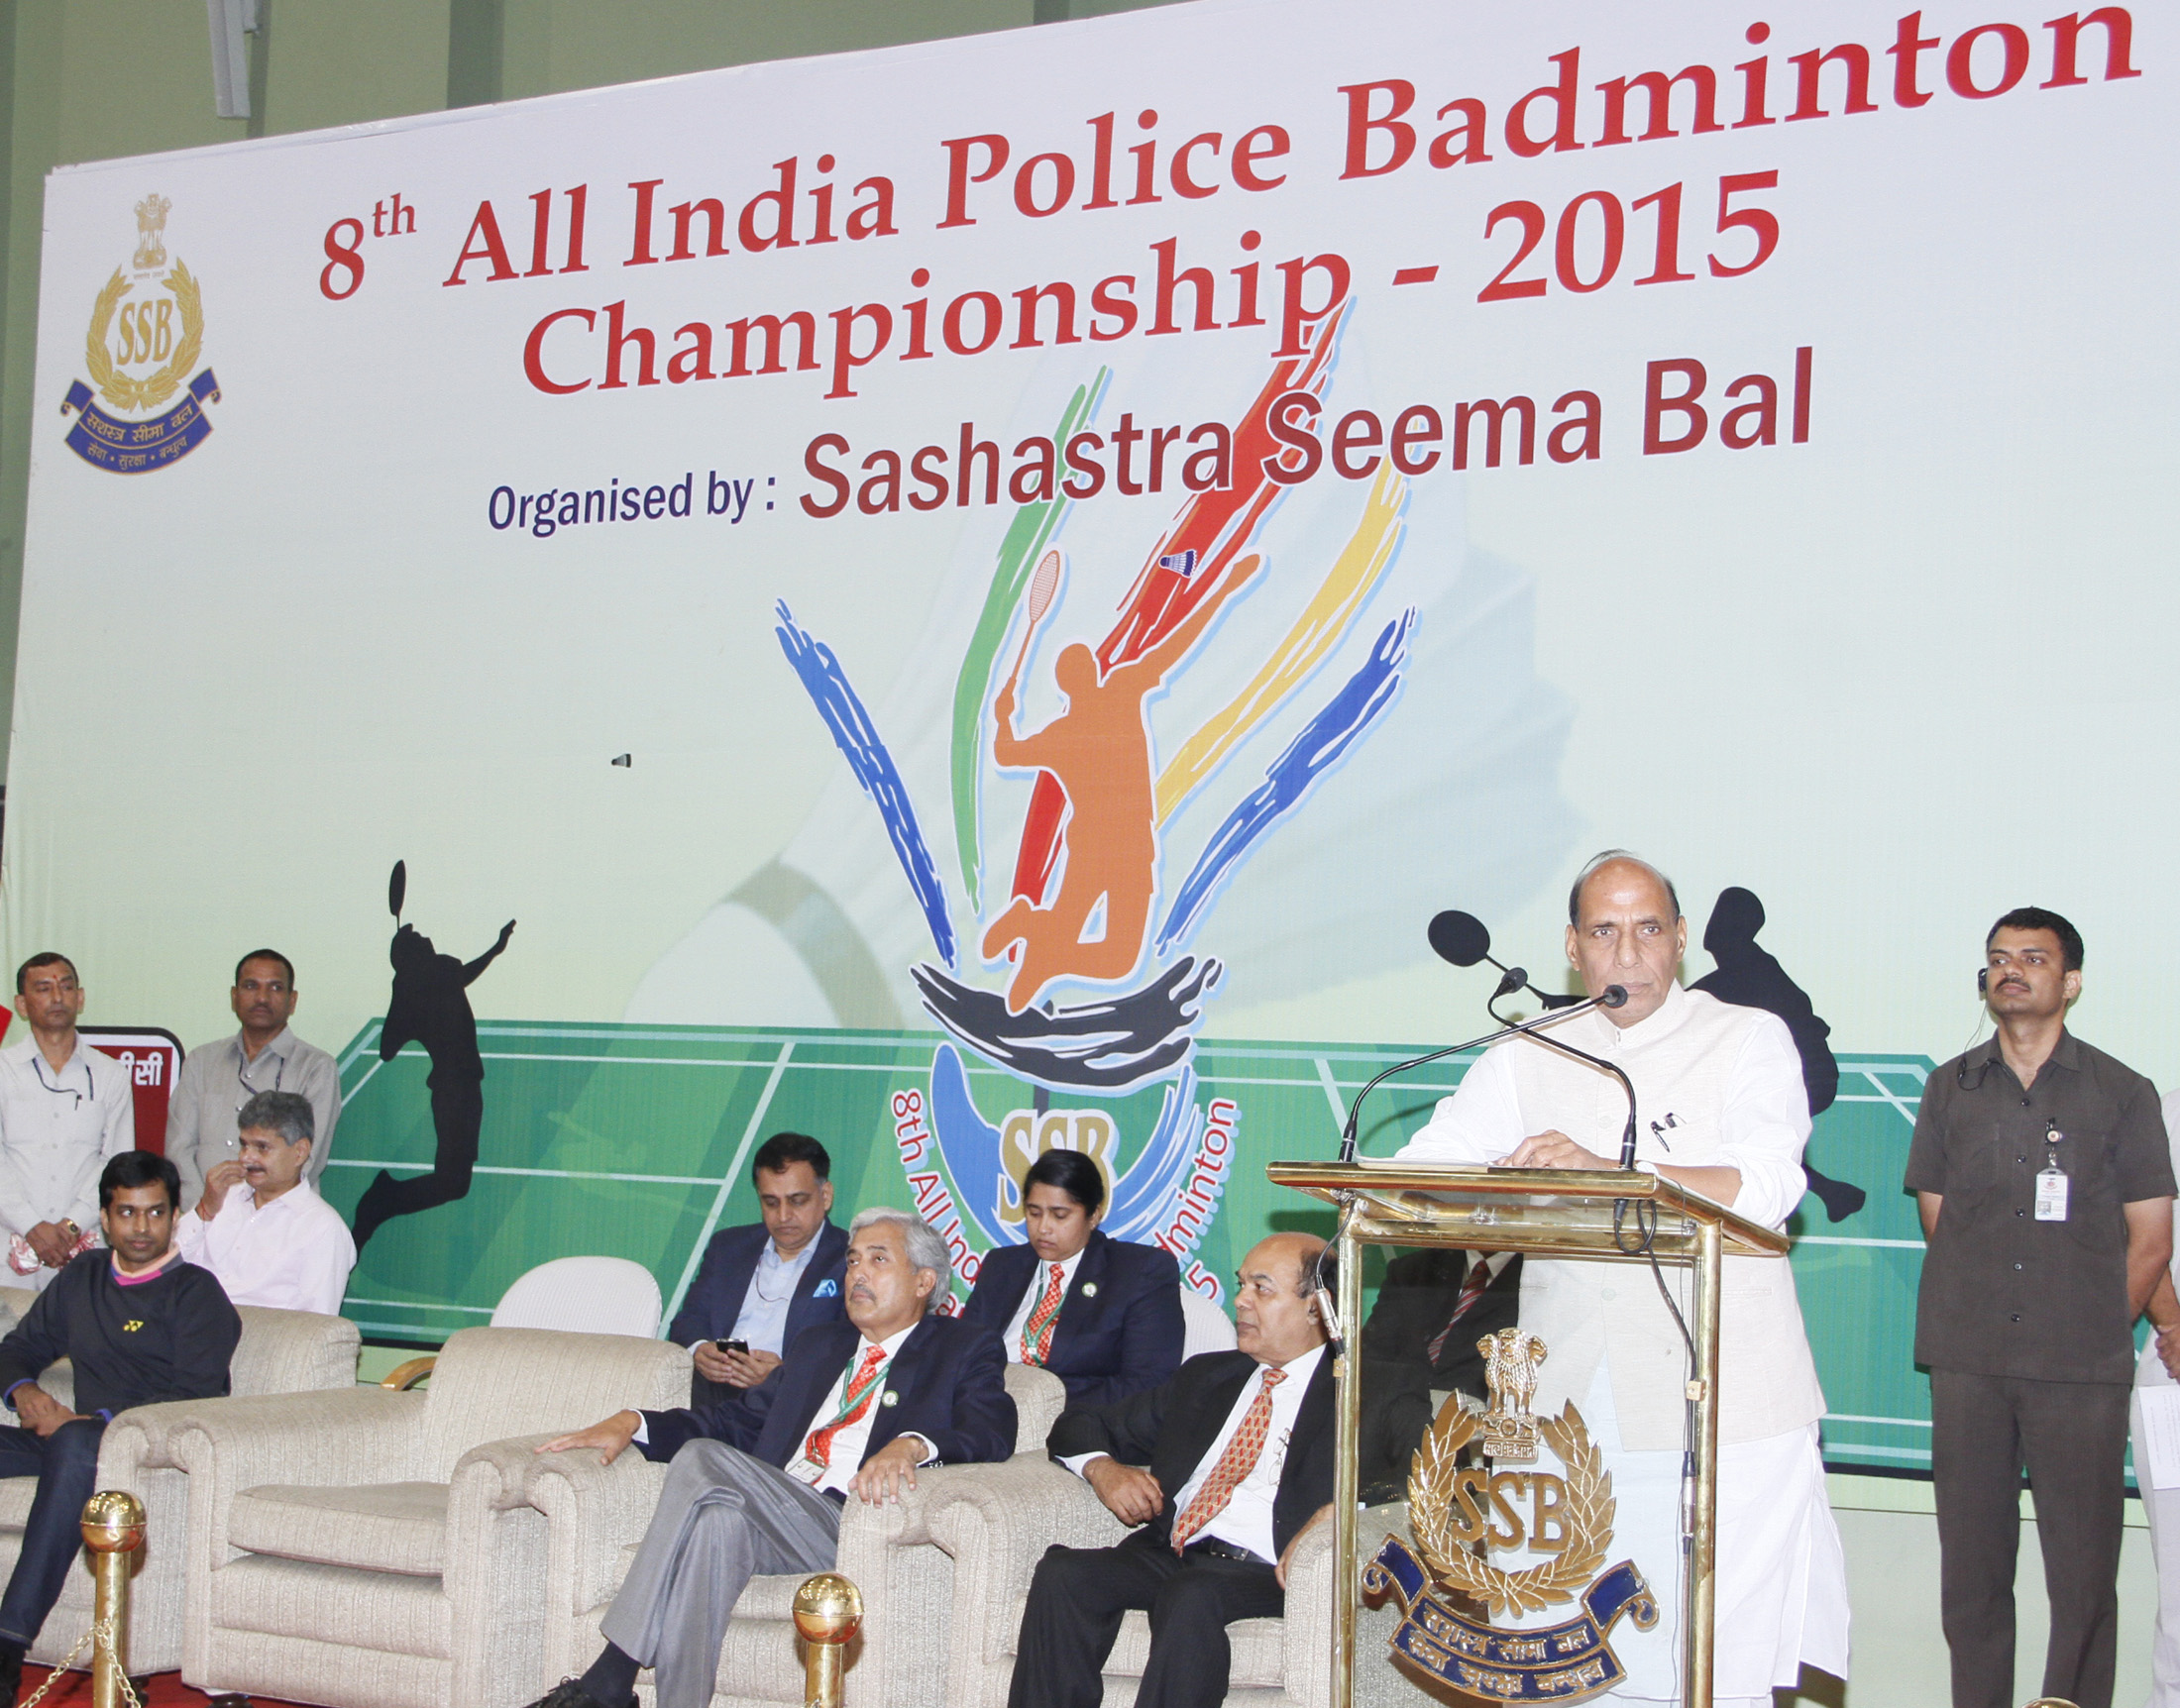 The Union Home Minister, Shri Rajnath Singh addressing gathering at the Closing Ceremony of the 8th All-India Police Badminton Championship-2015, in New Delhi on November 06, 2015.  	The Director General, Sashastra Seema Bal, Shri B.D. Sharma is also seen.